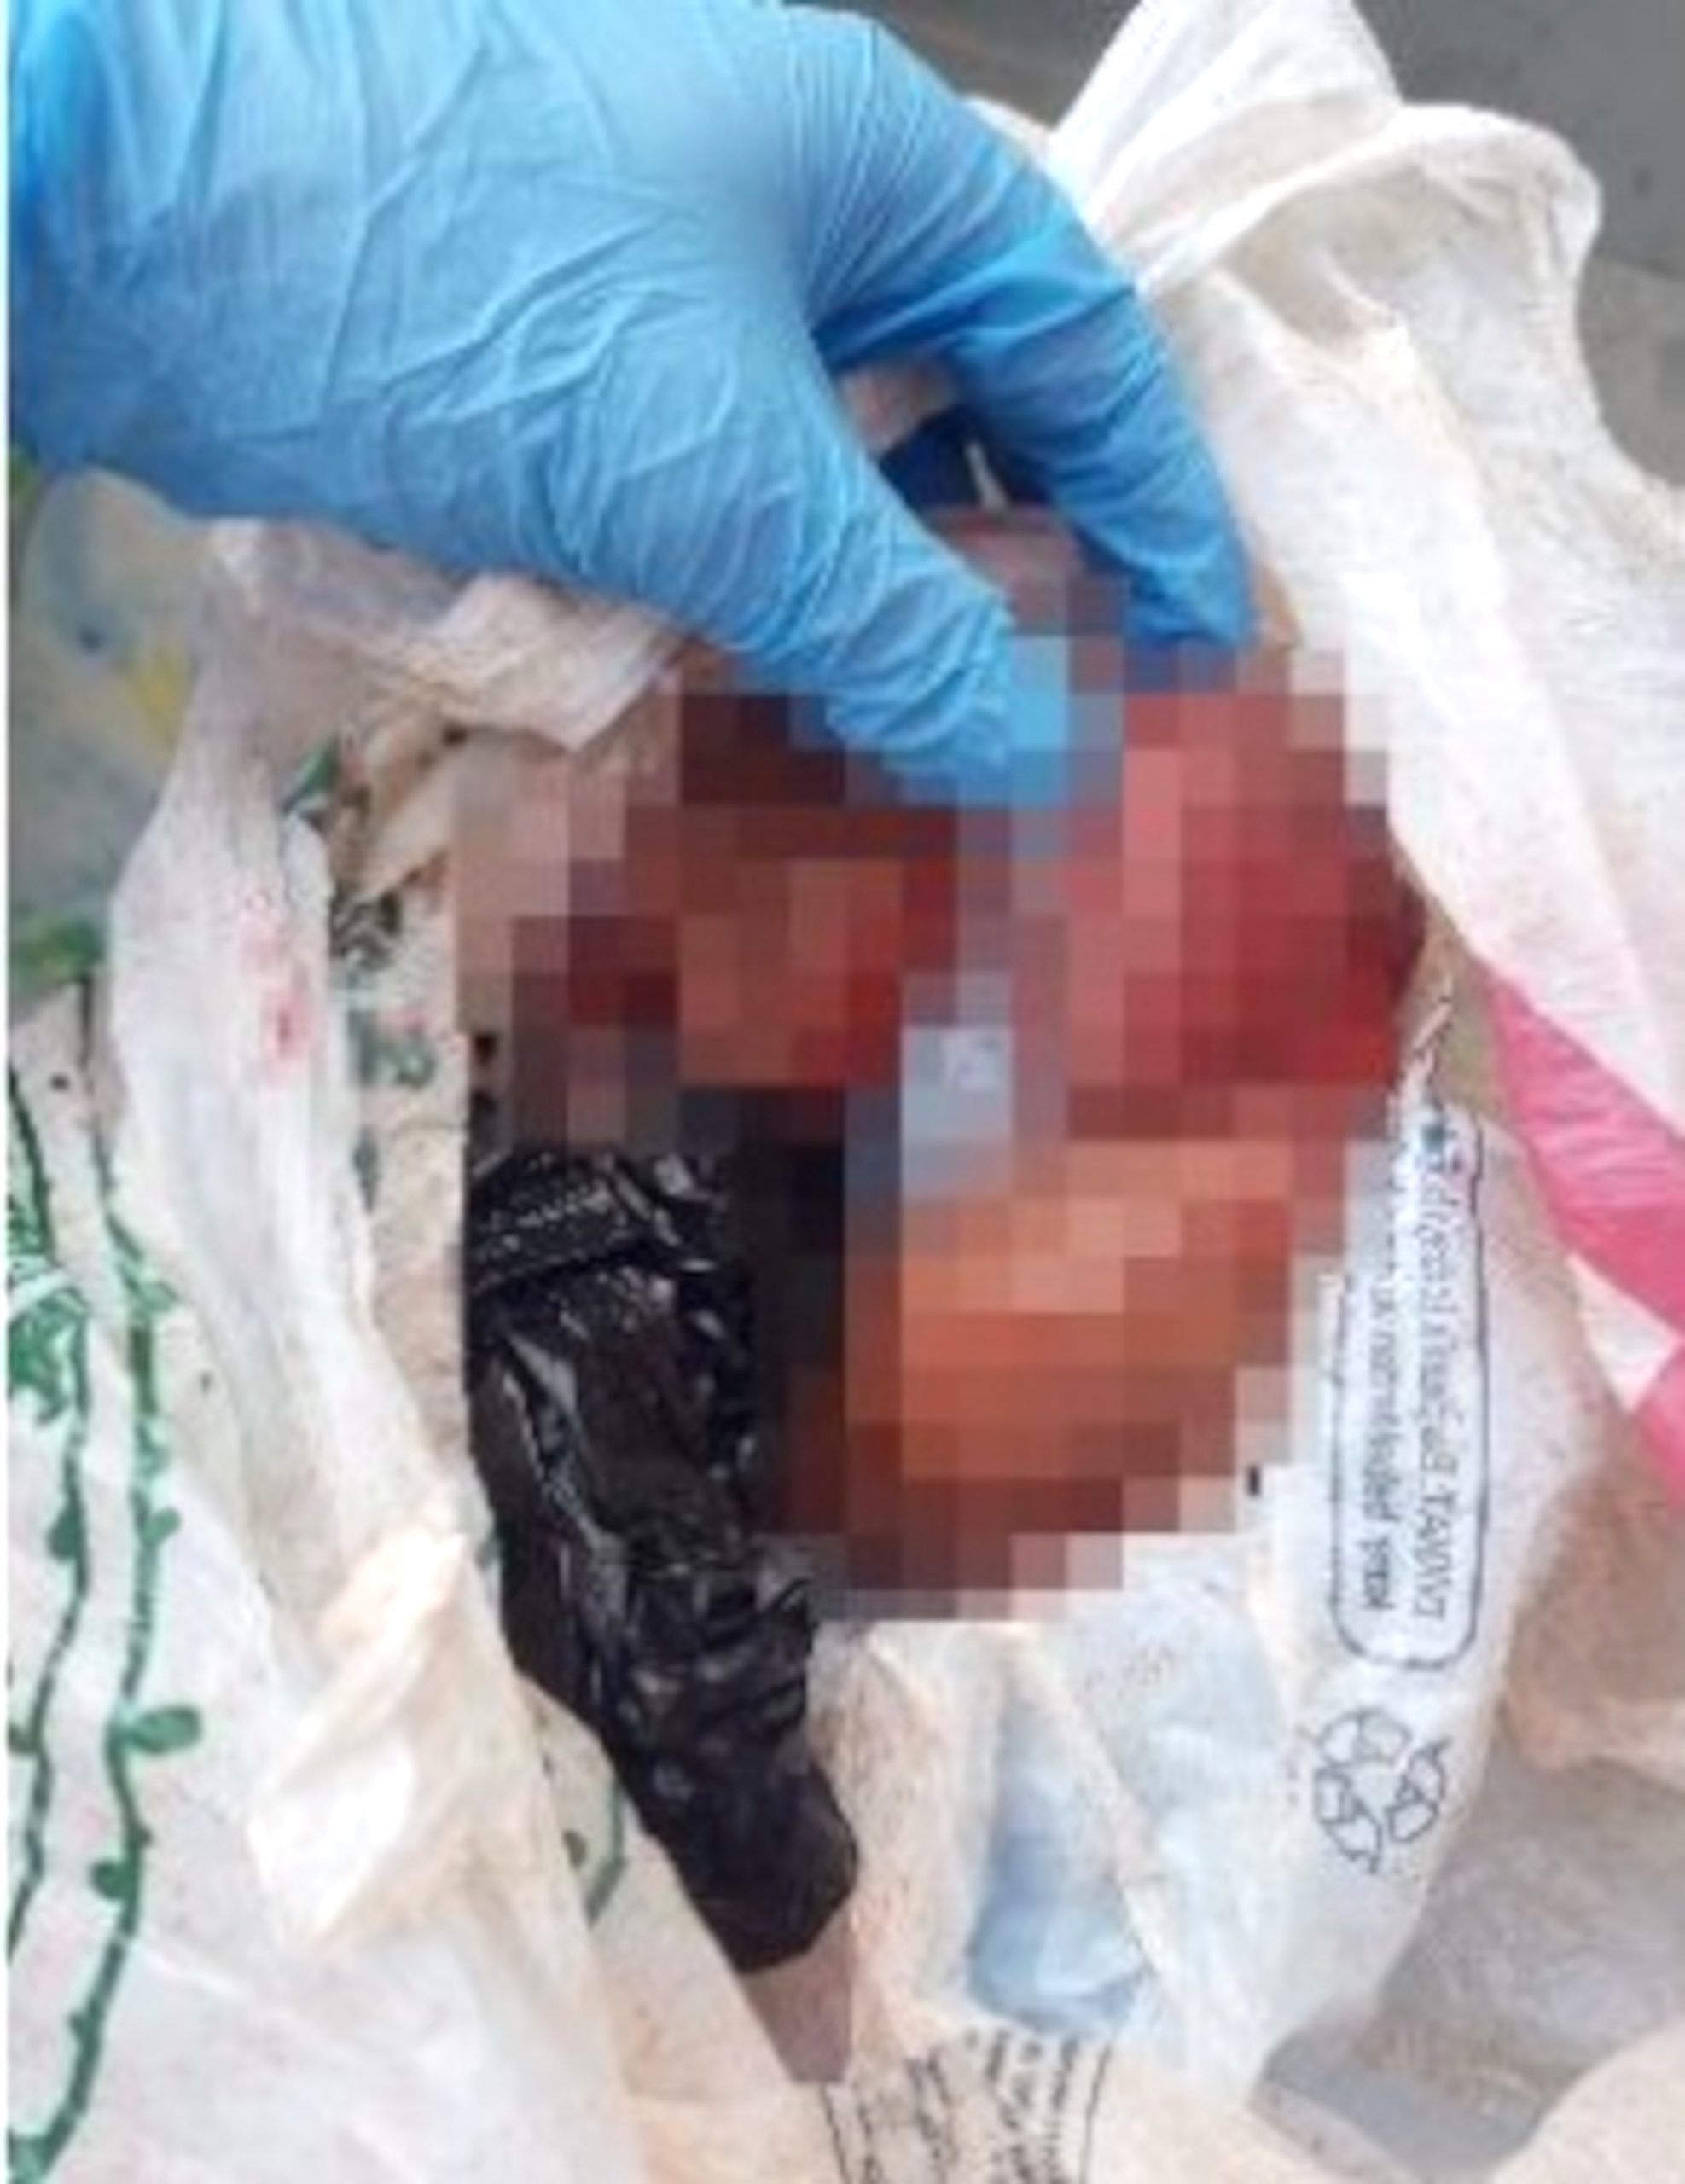 Read more about the article Prostitute Has Miscarriage In Street And Throws Foetus In Bin